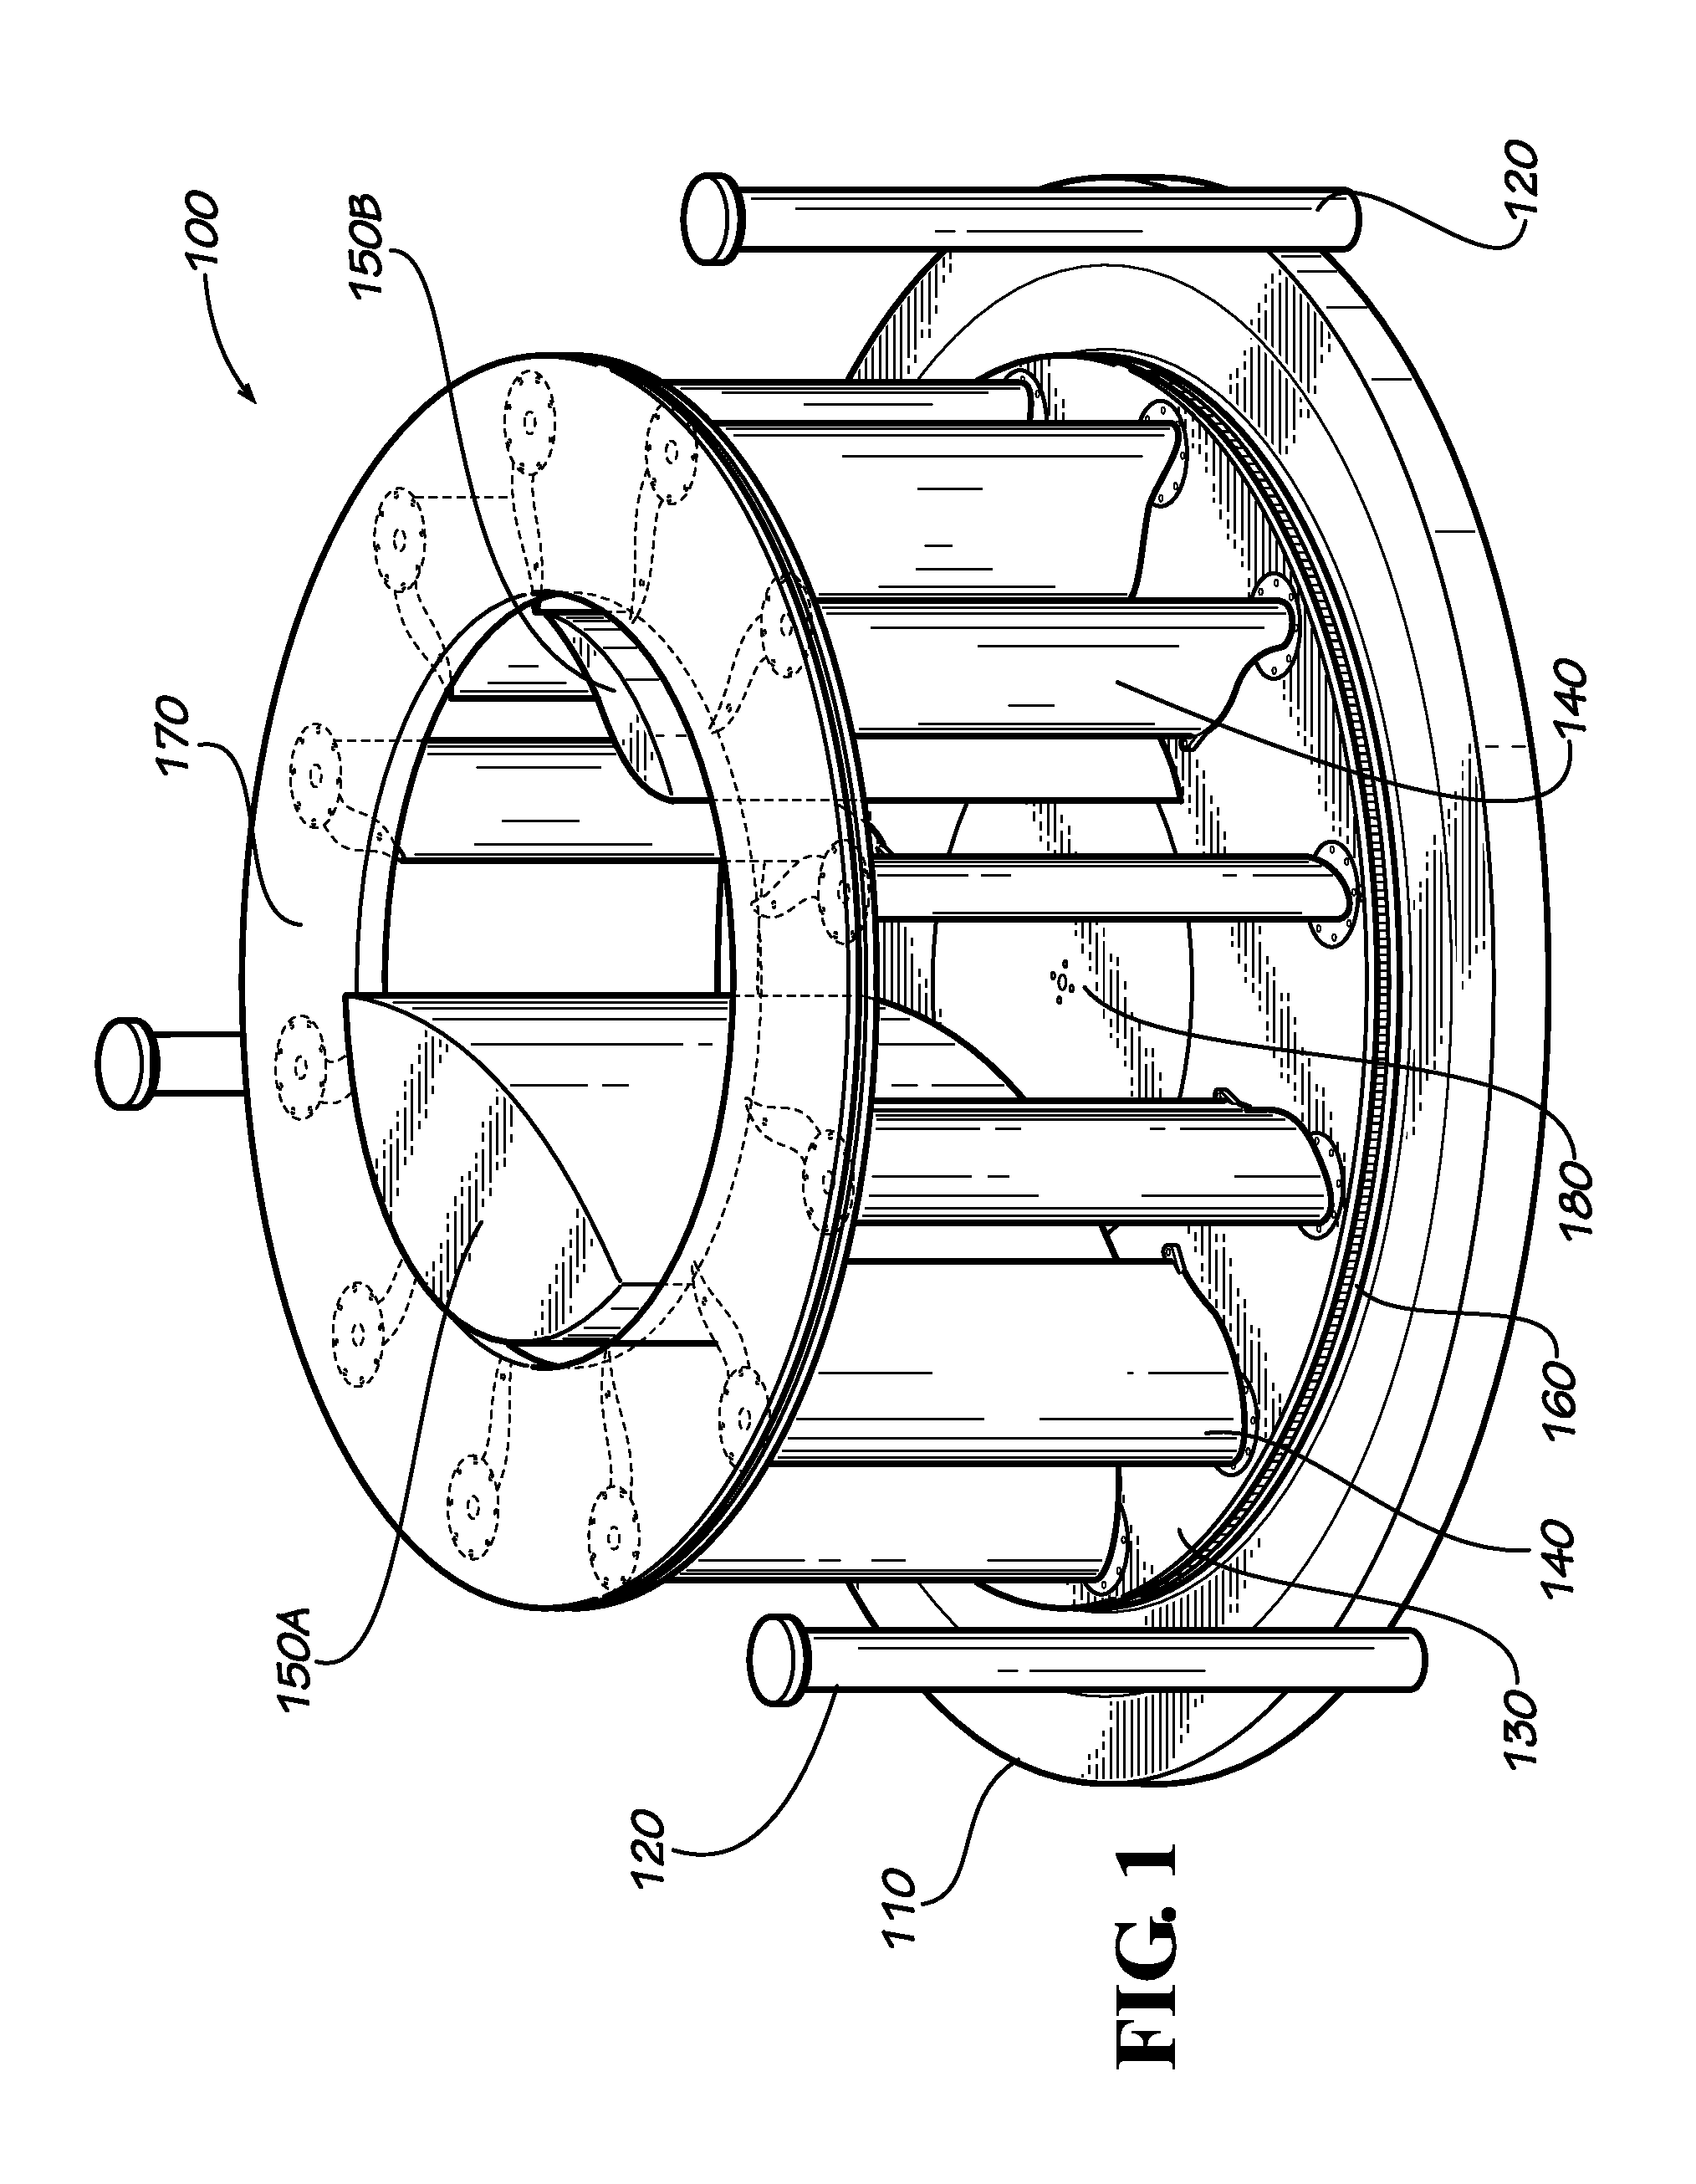 System, method and apparatus for vertical axis wind turbines with laminar flow